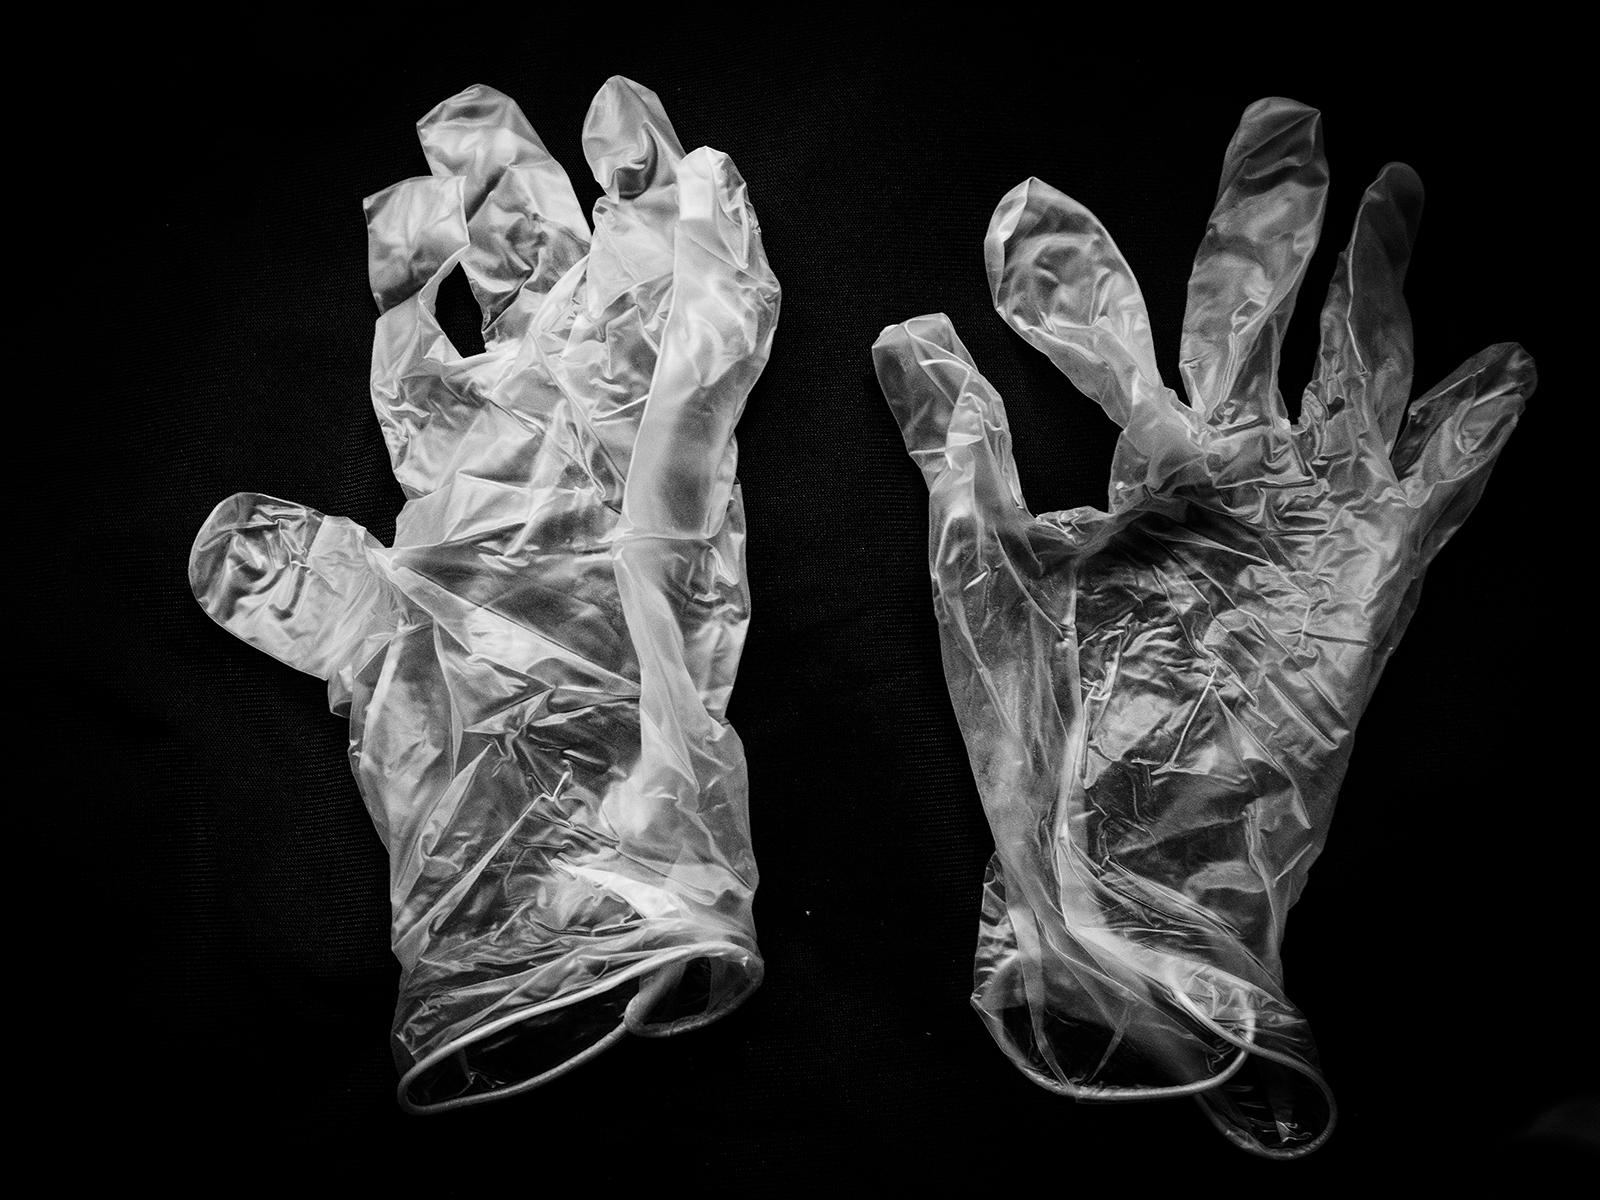 Lethargy. Social Alienation by Covid19 - Surgical gloves suitable for home use, their disposal...